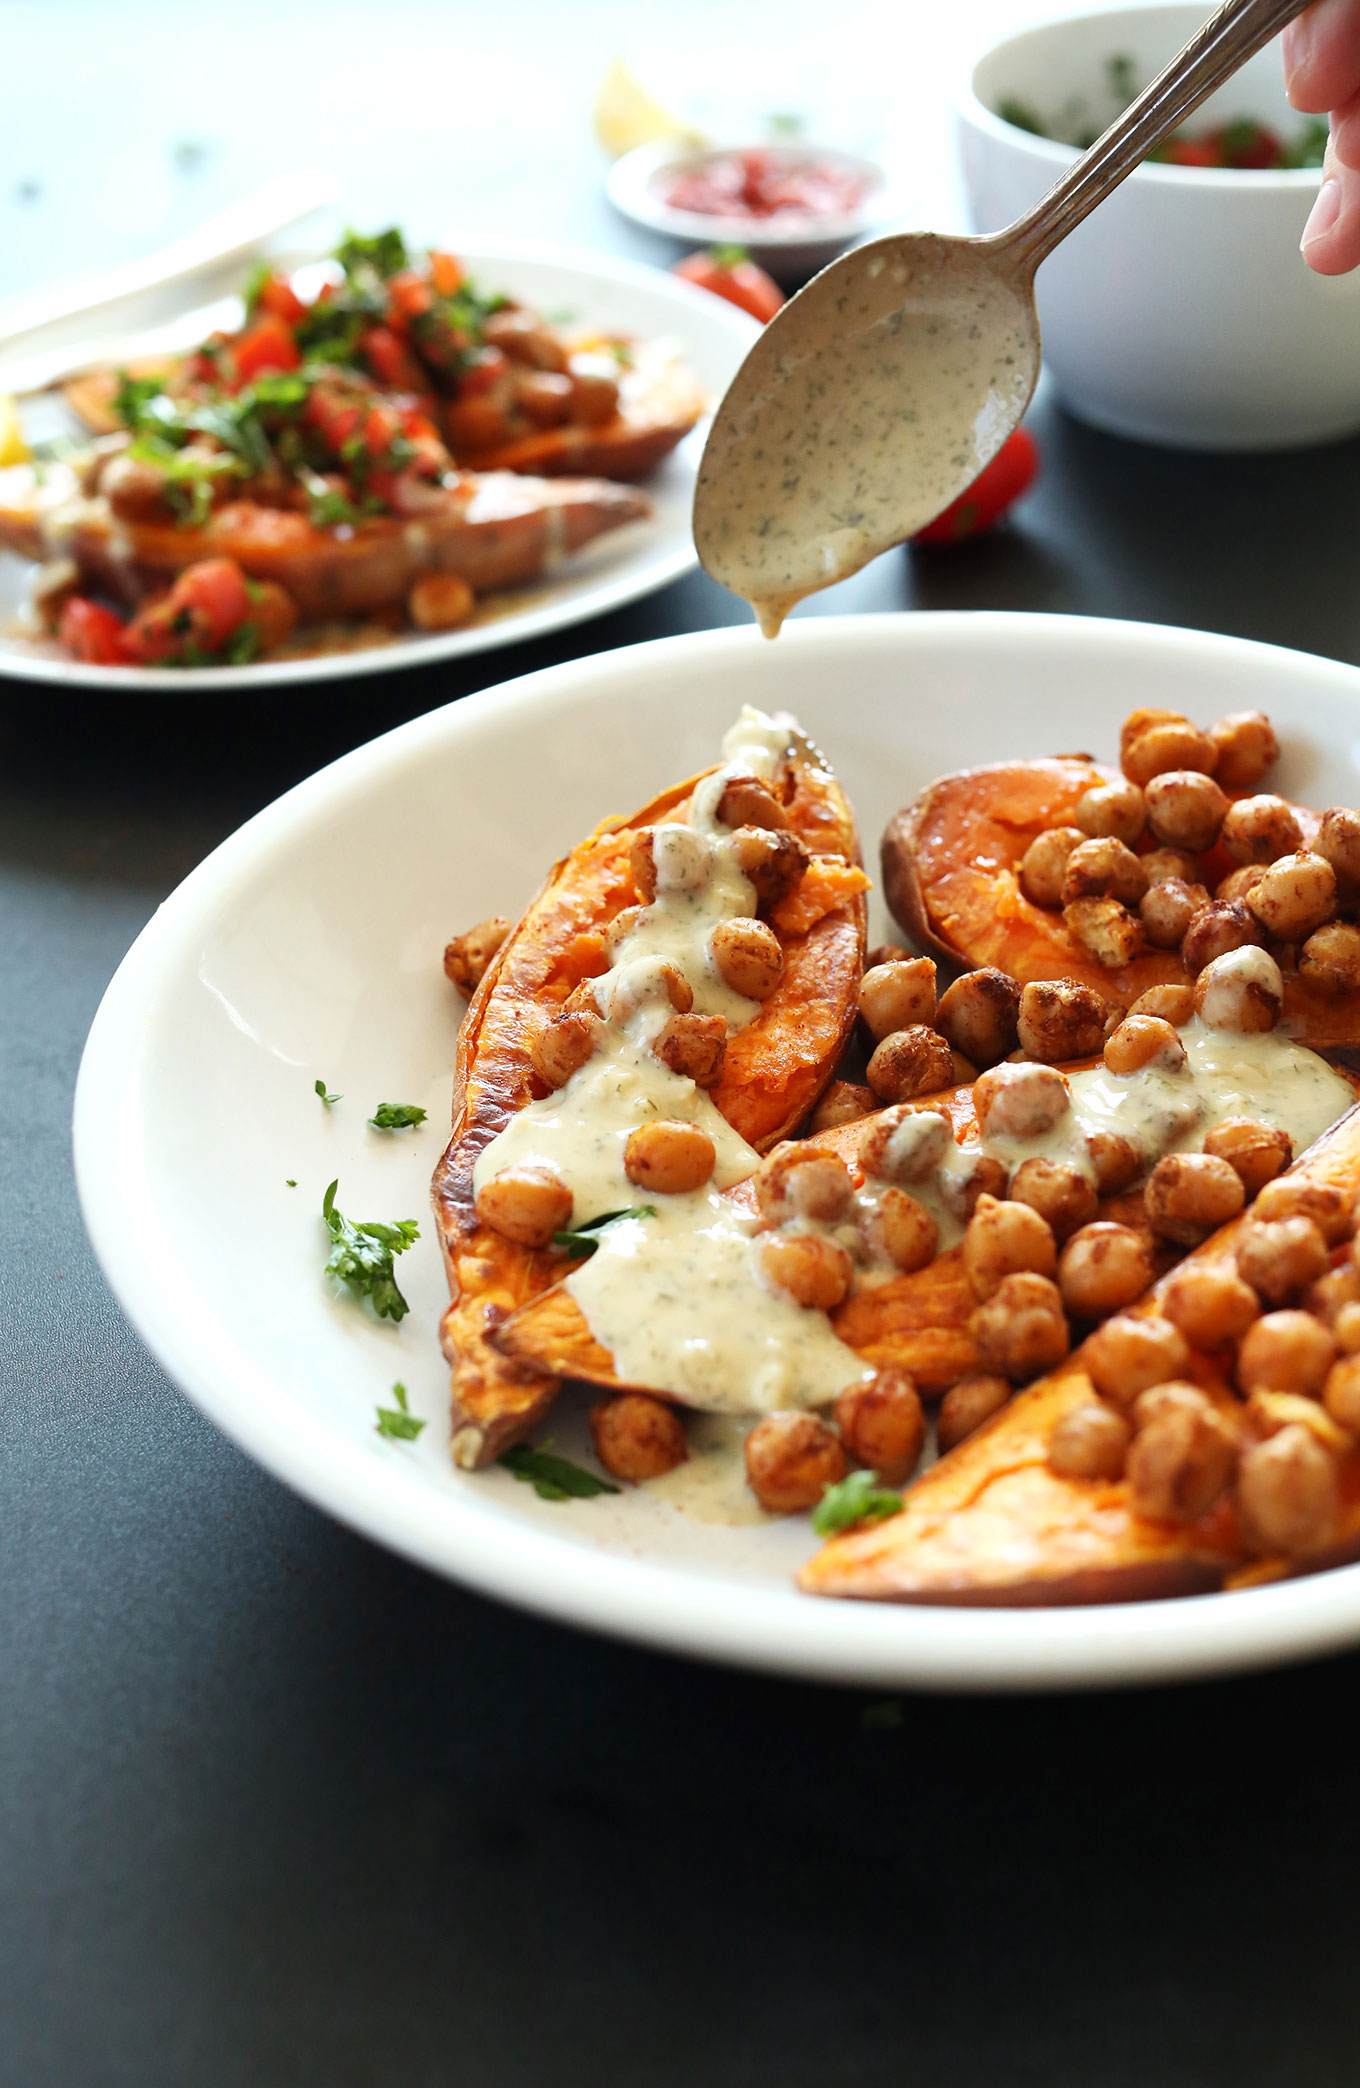 Drizzling dressing onto our Mediterranean Baked Sweet Potatoes recipe